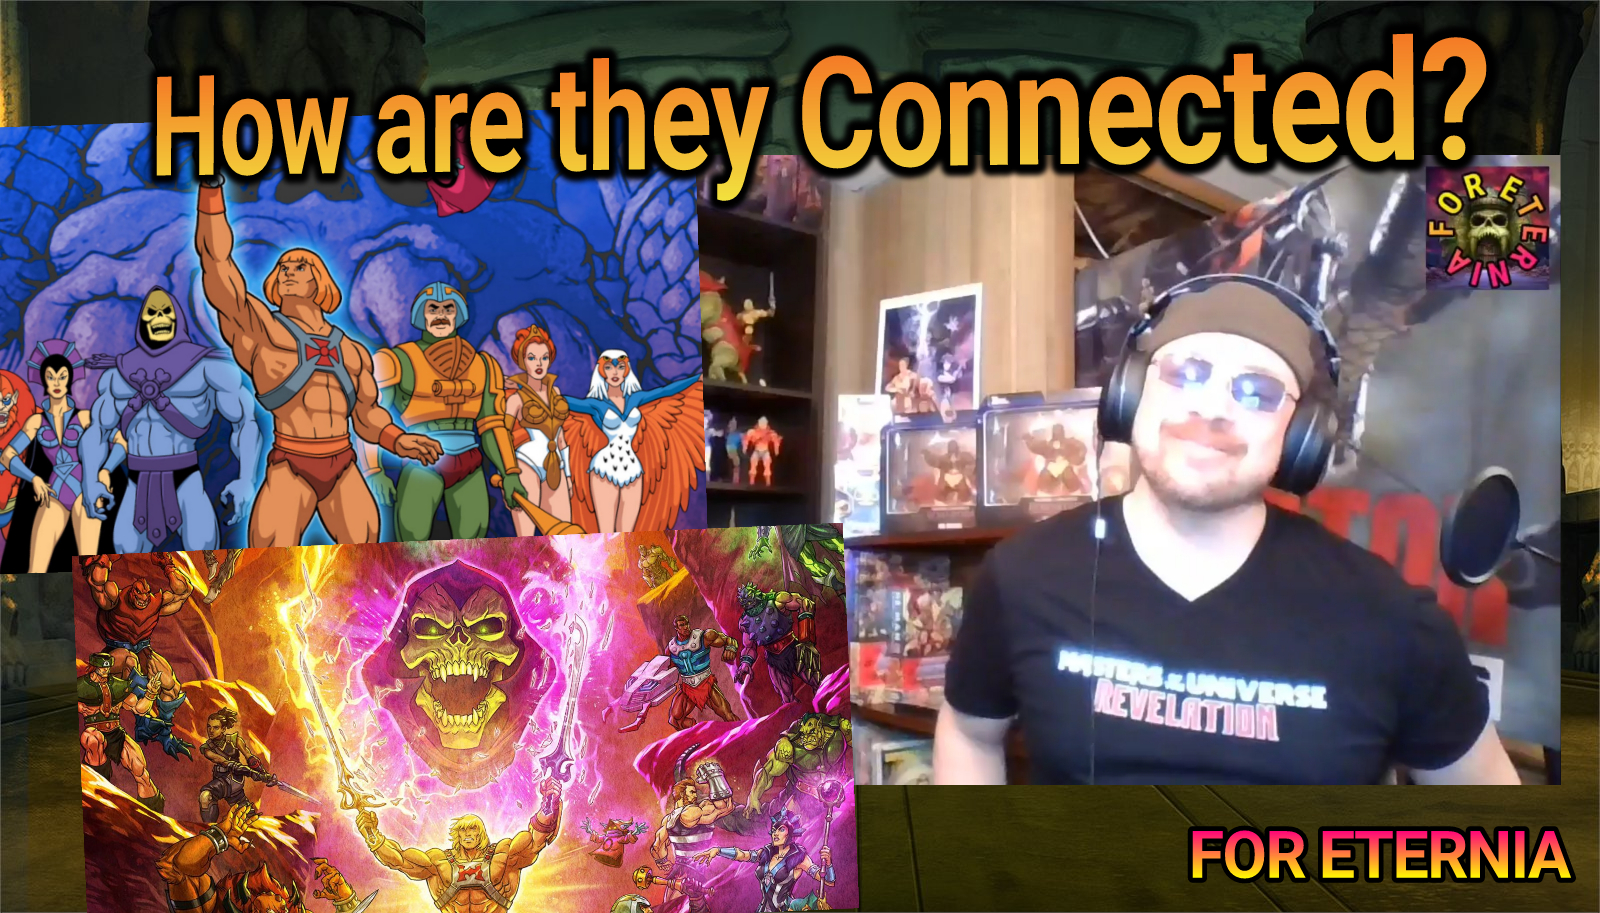 How are Filmation’s He-Man & Masters of the Universe and Masters of the Universe: Revelation Connected